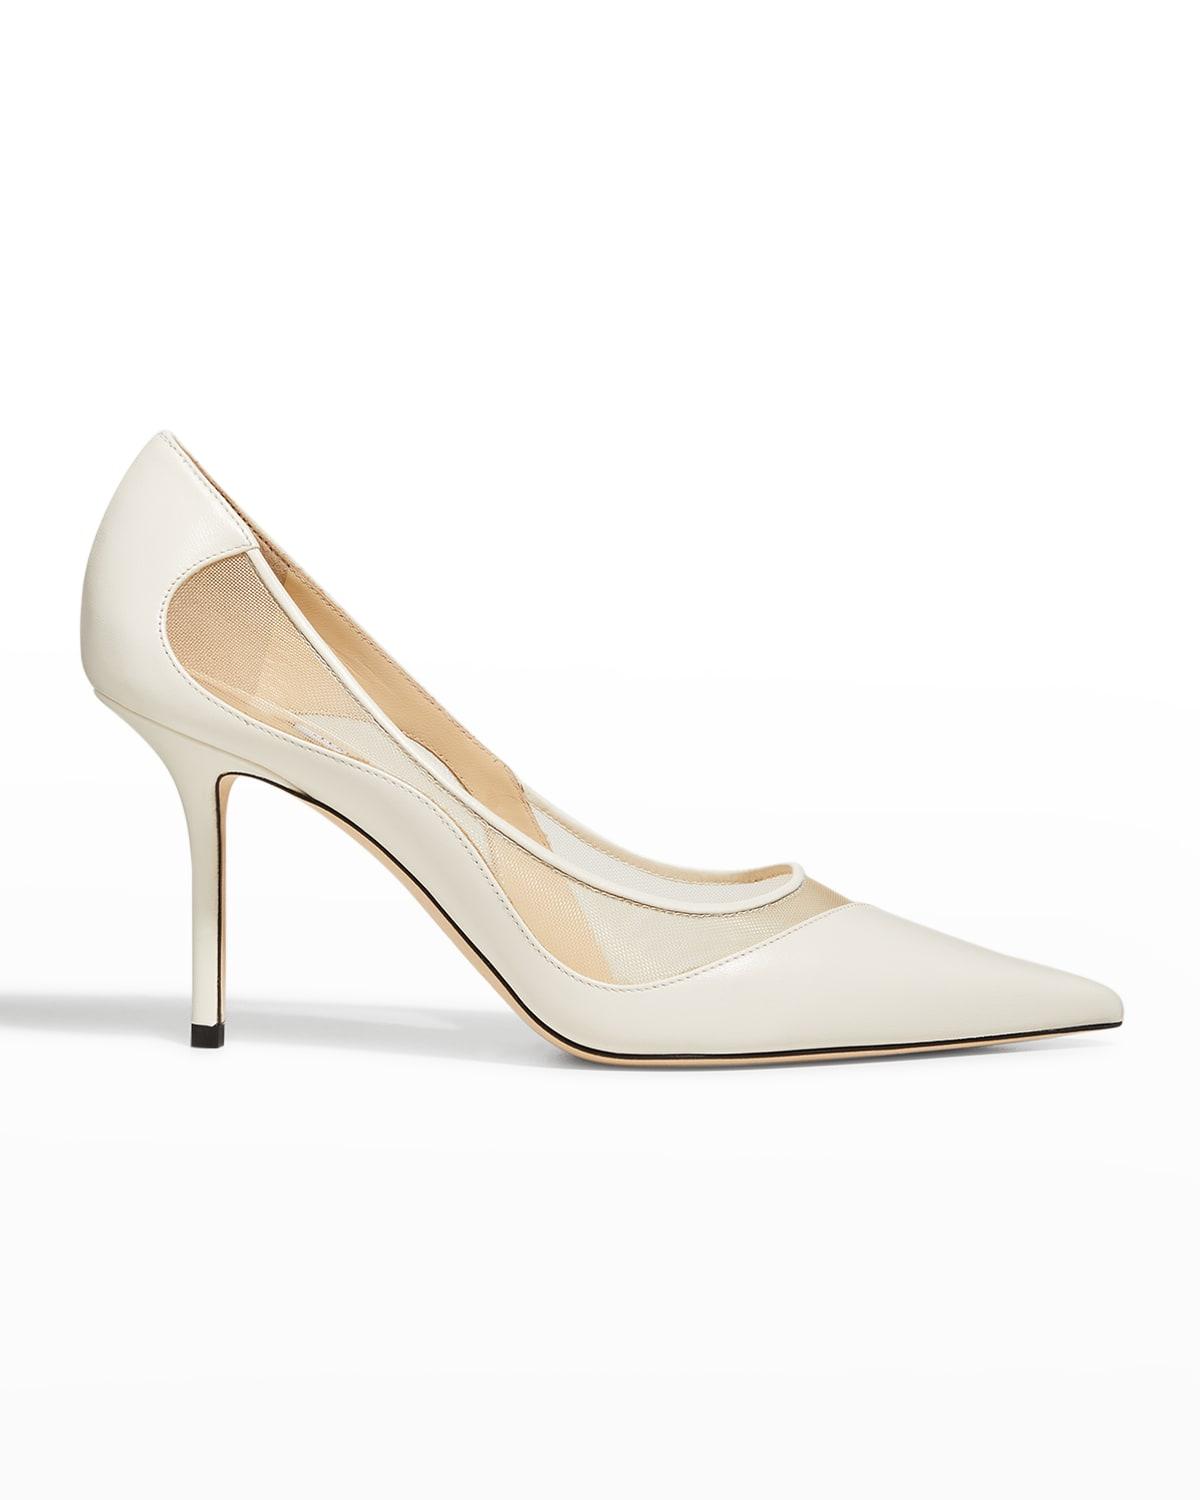 Jimmy Choo Love Leather Mesh Pumps in White | Lyst